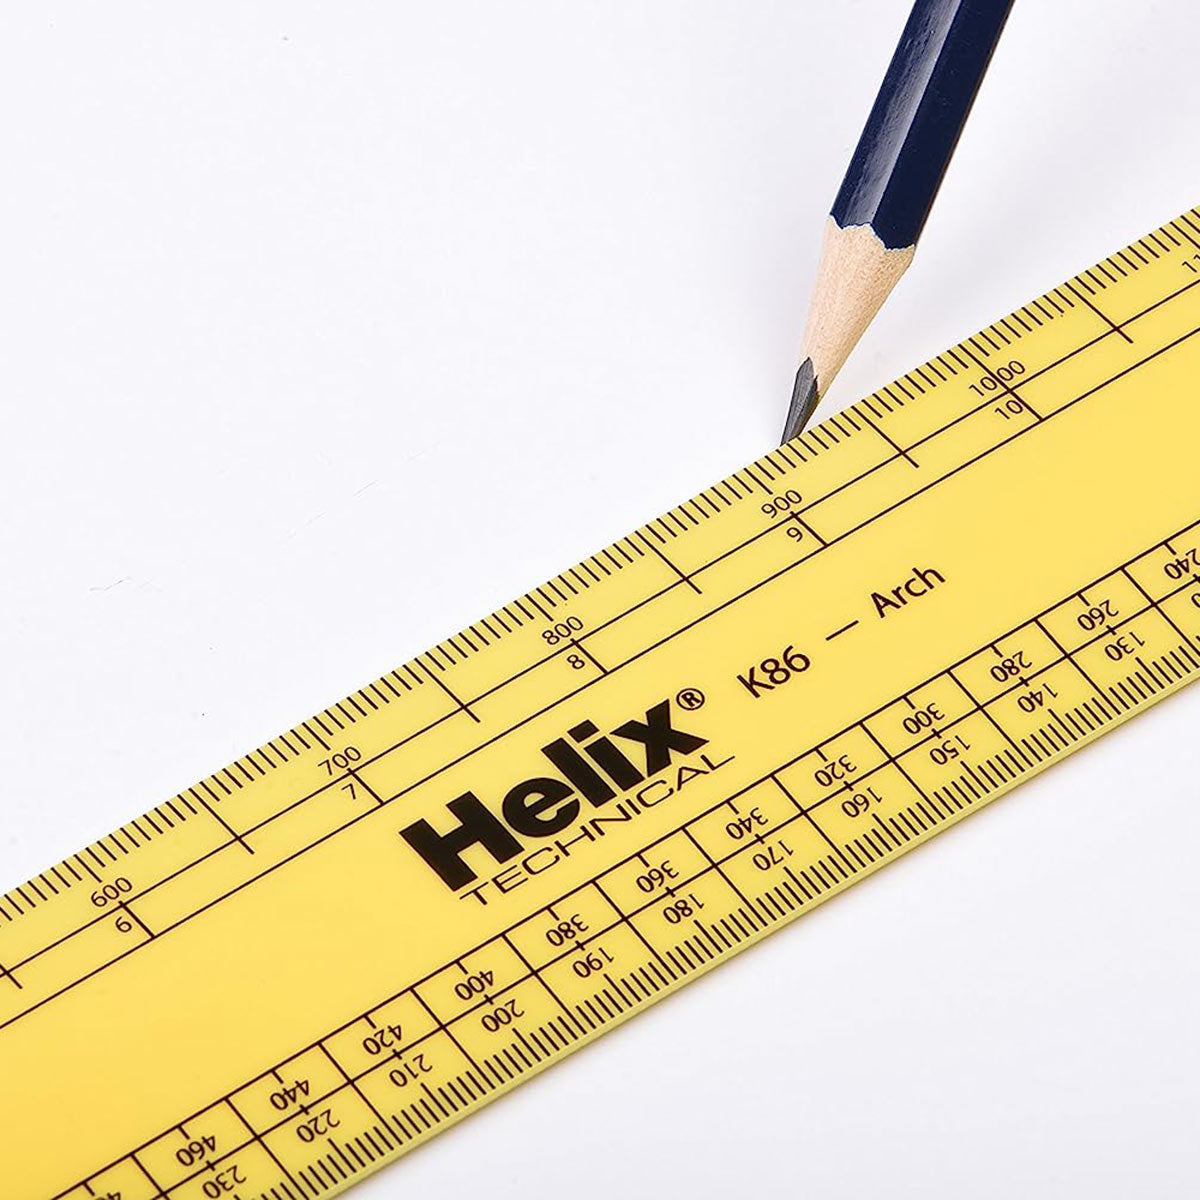 Helix - 30 cm Architects Scale Ruler